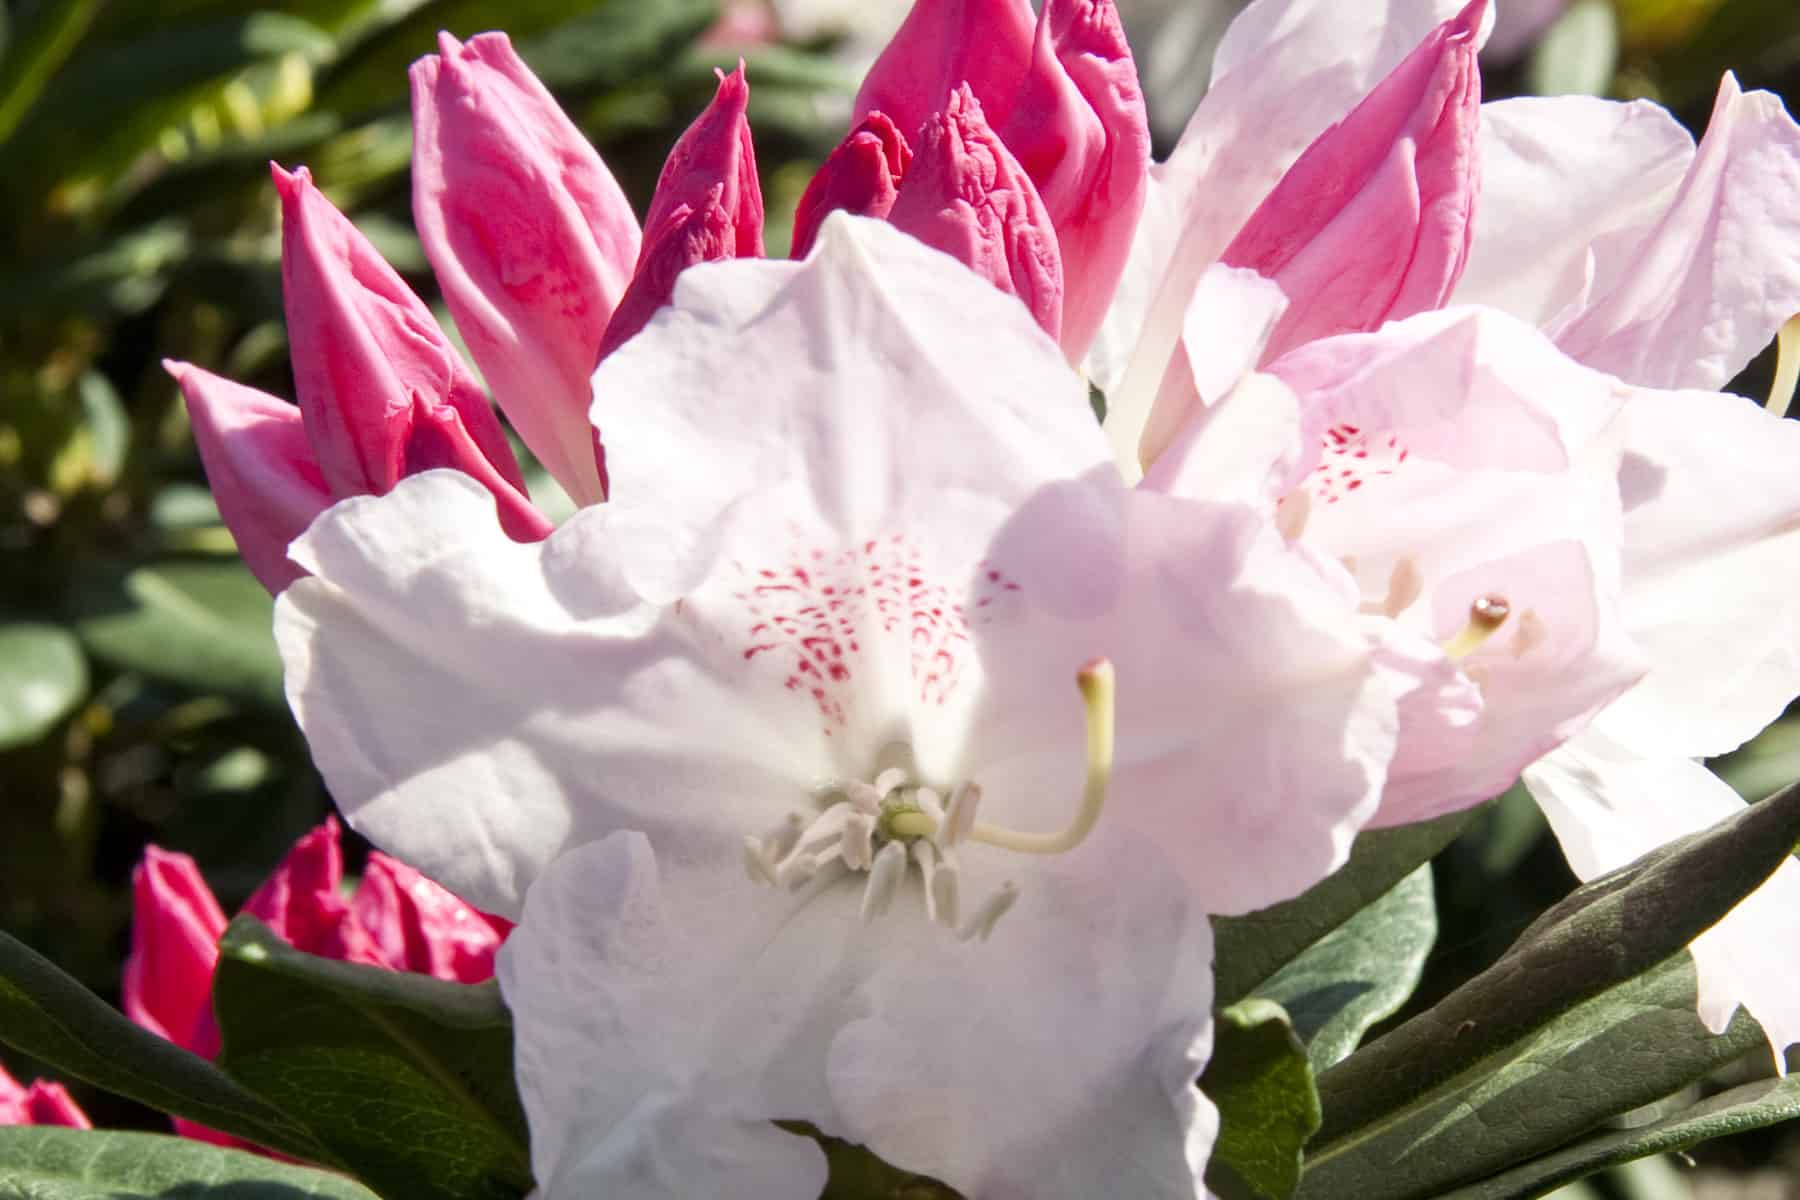 Bright pink flowerbuds with an open Grace Southgate Rhododendron white petals with pink freckles